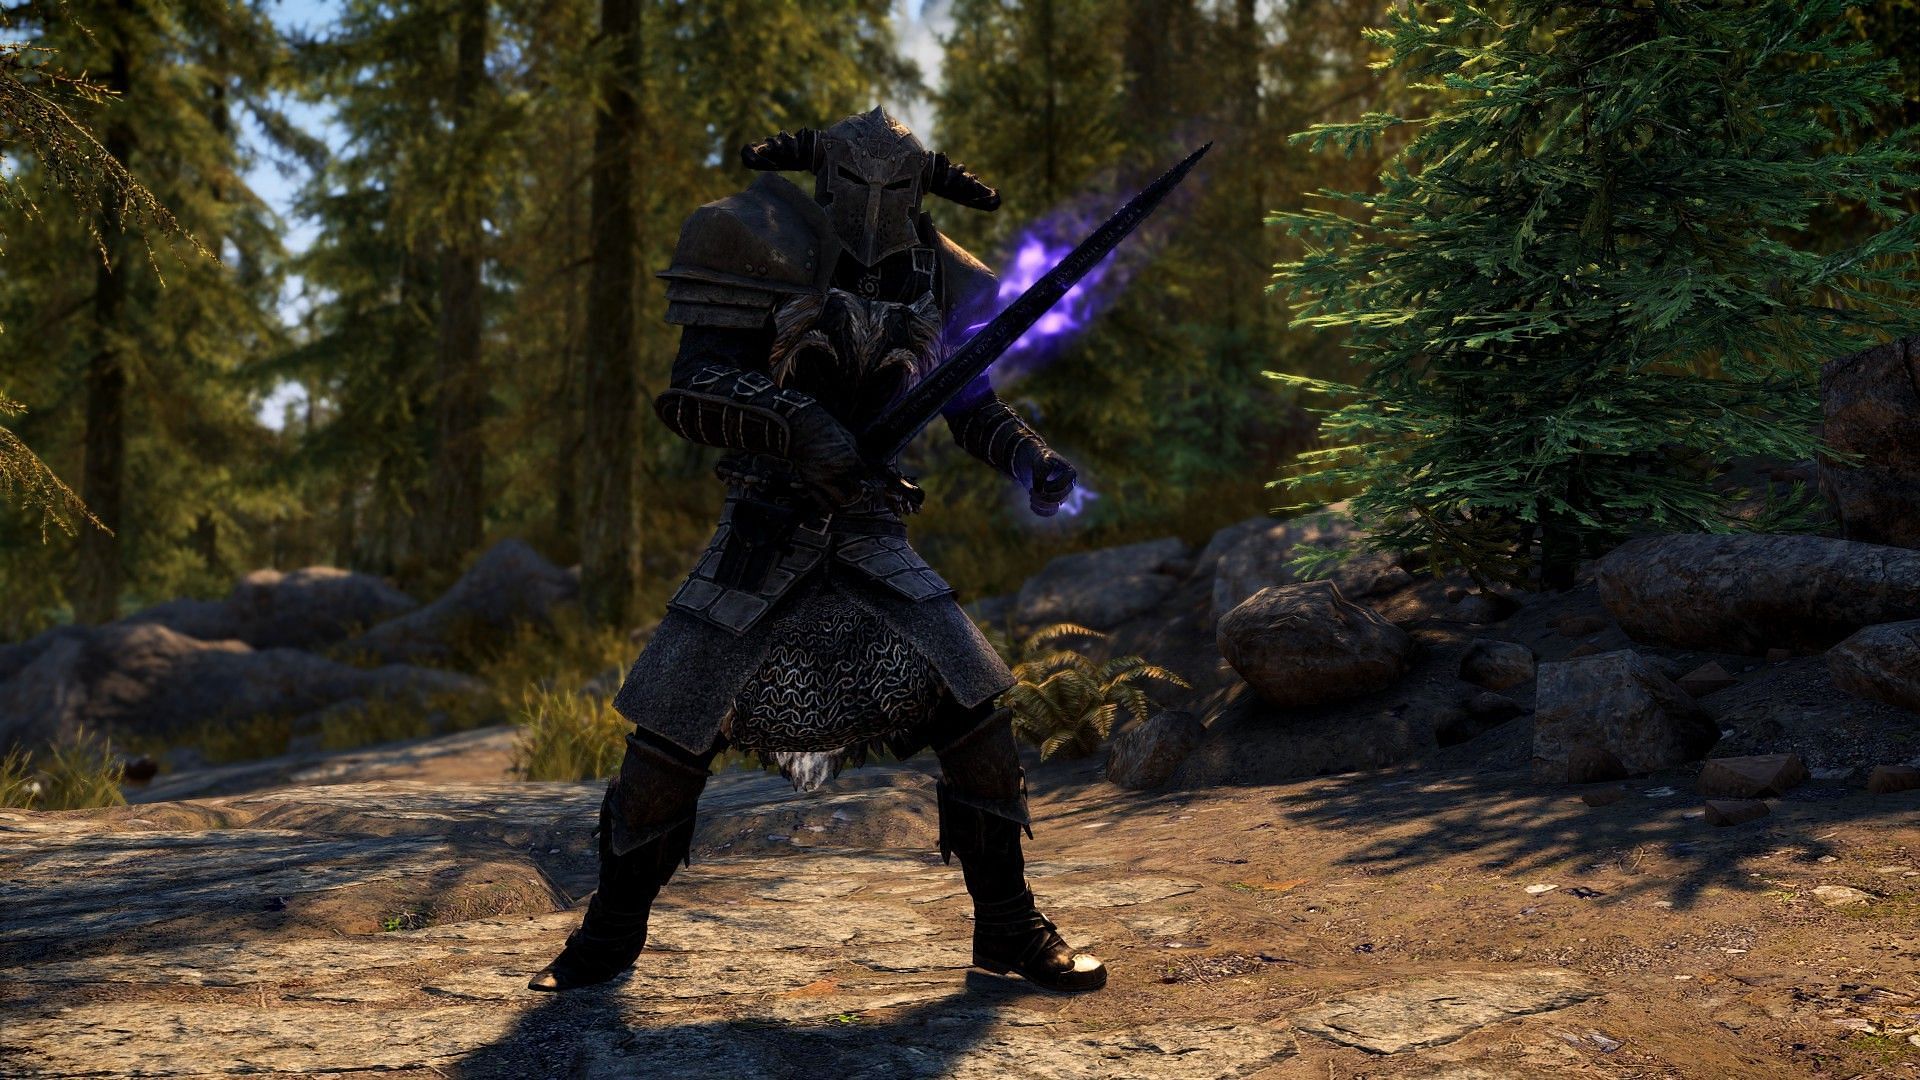 Death Knight uses two Skyrim major skills: conjuration and two-handed (Image via Nexusmods)